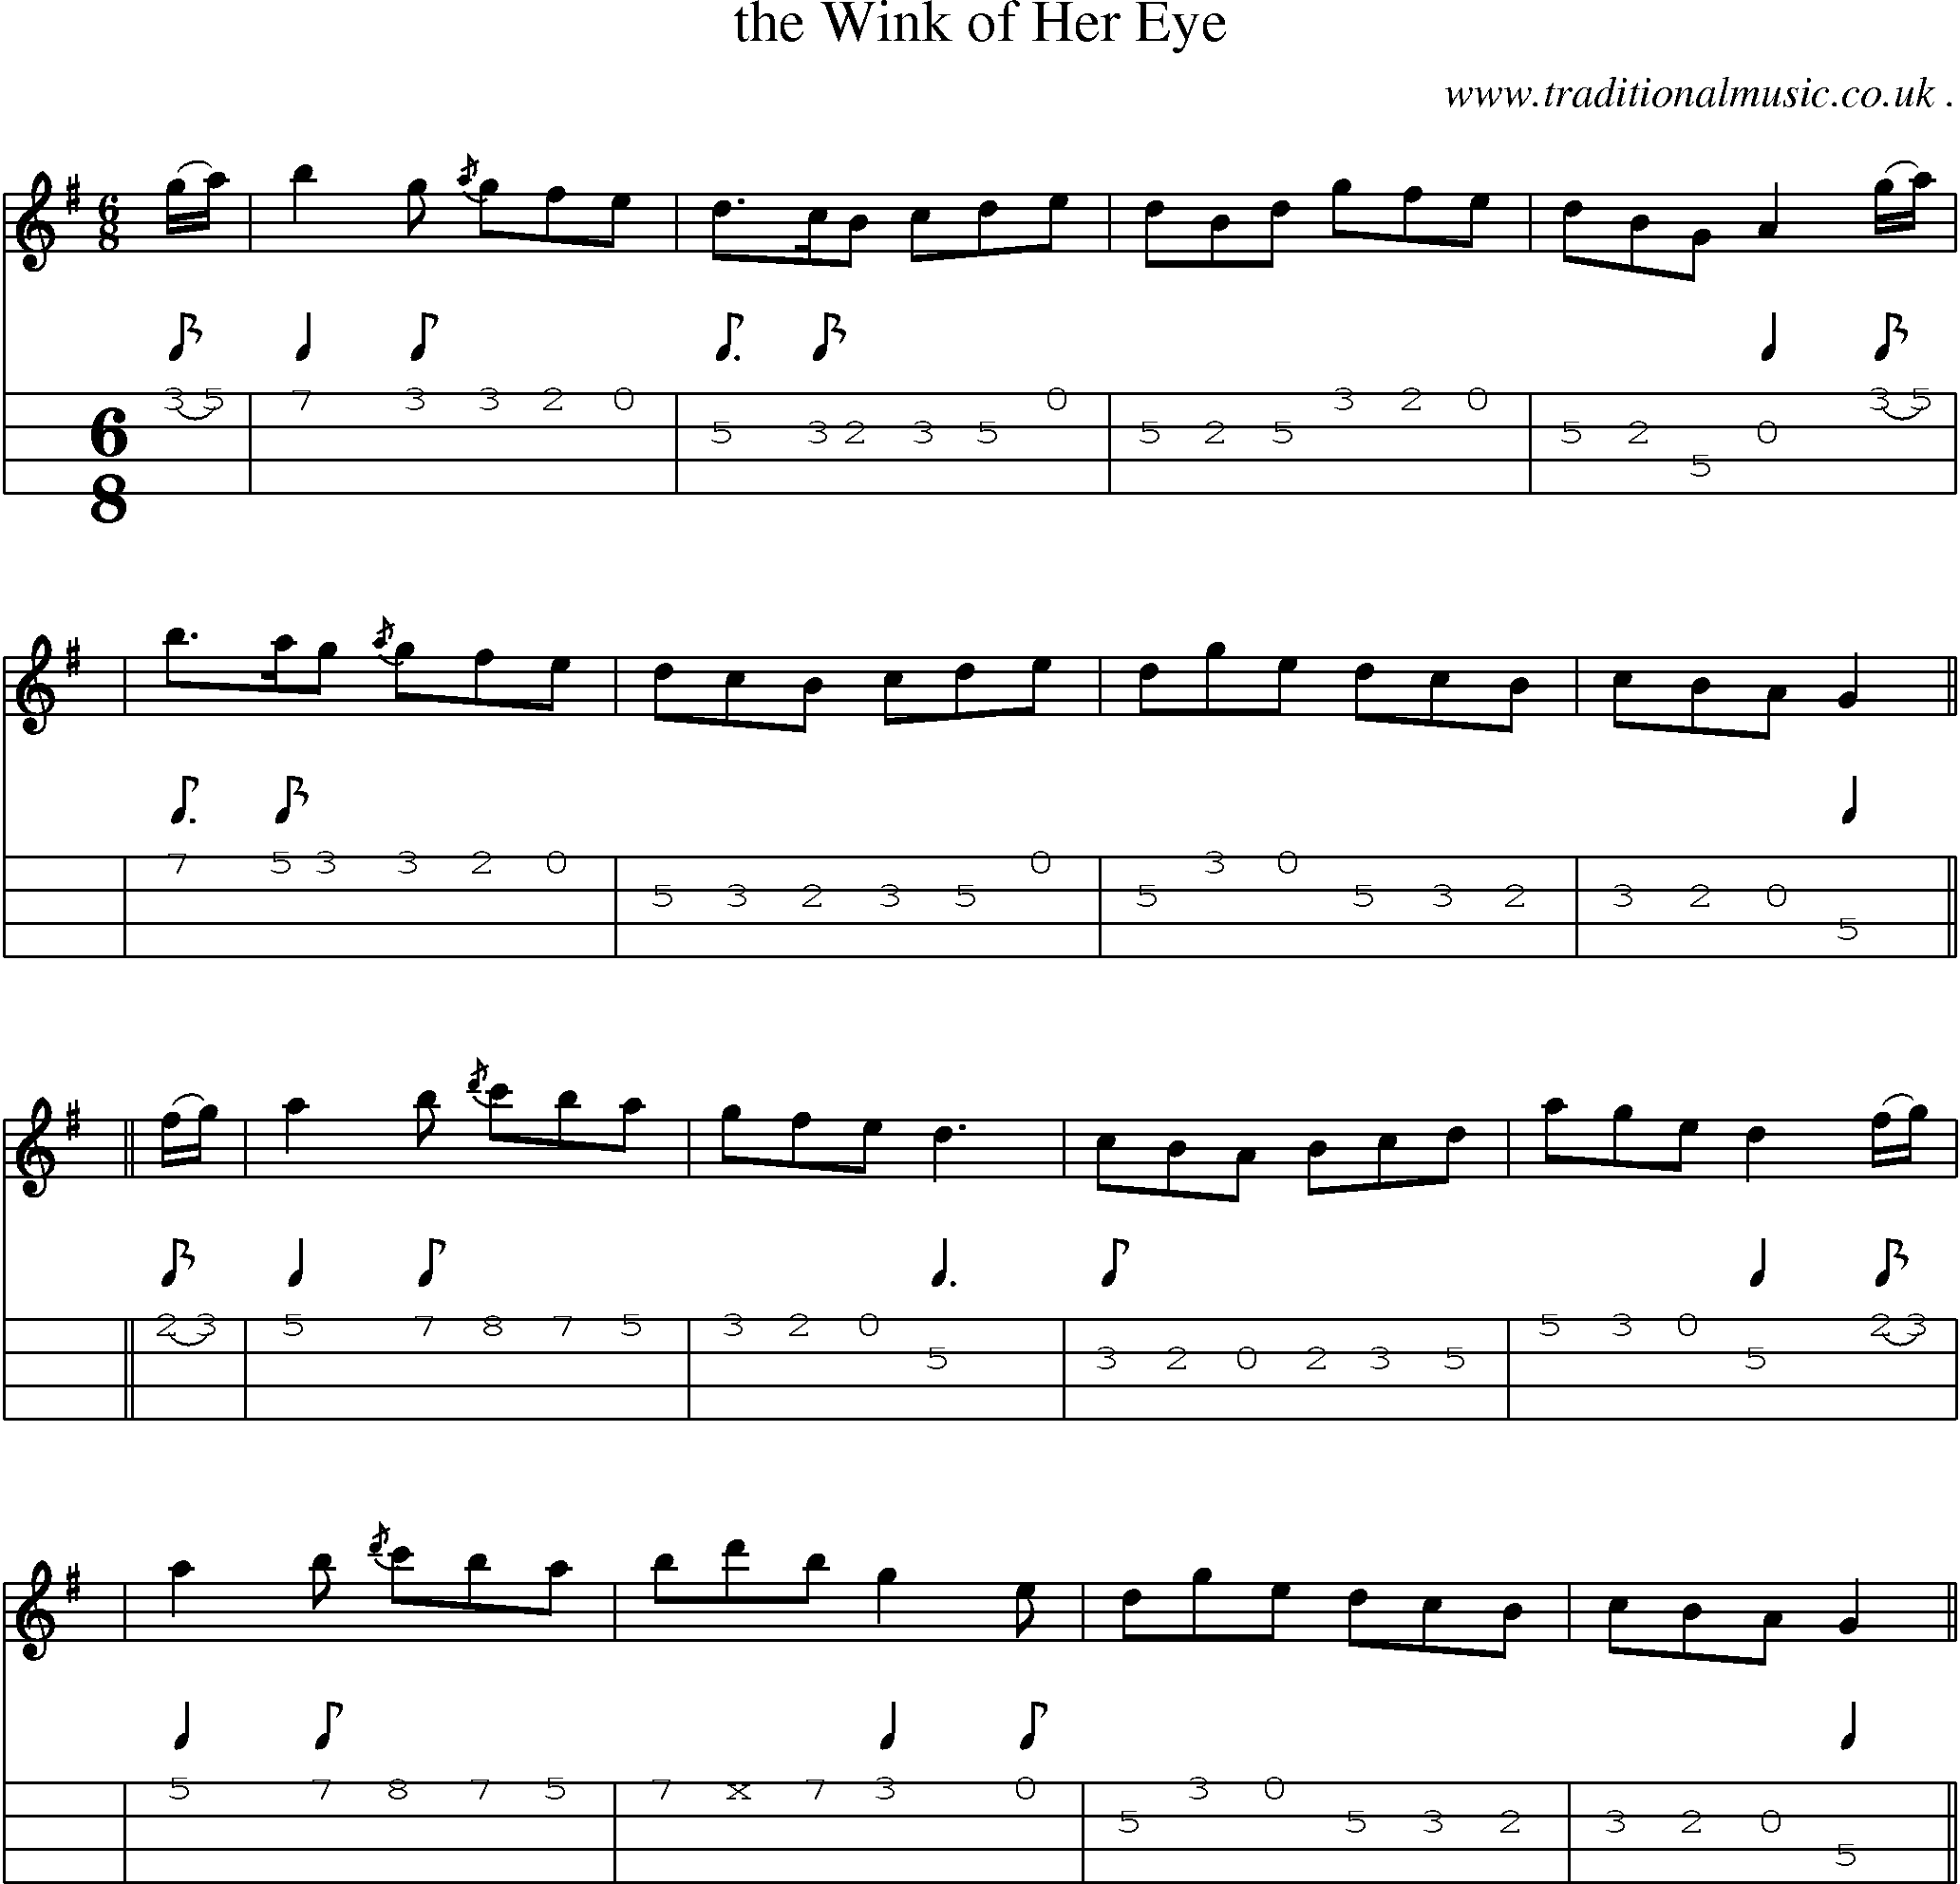 Sheet-music  score, Chords and Mandolin Tabs for The Wink Of Her Eye